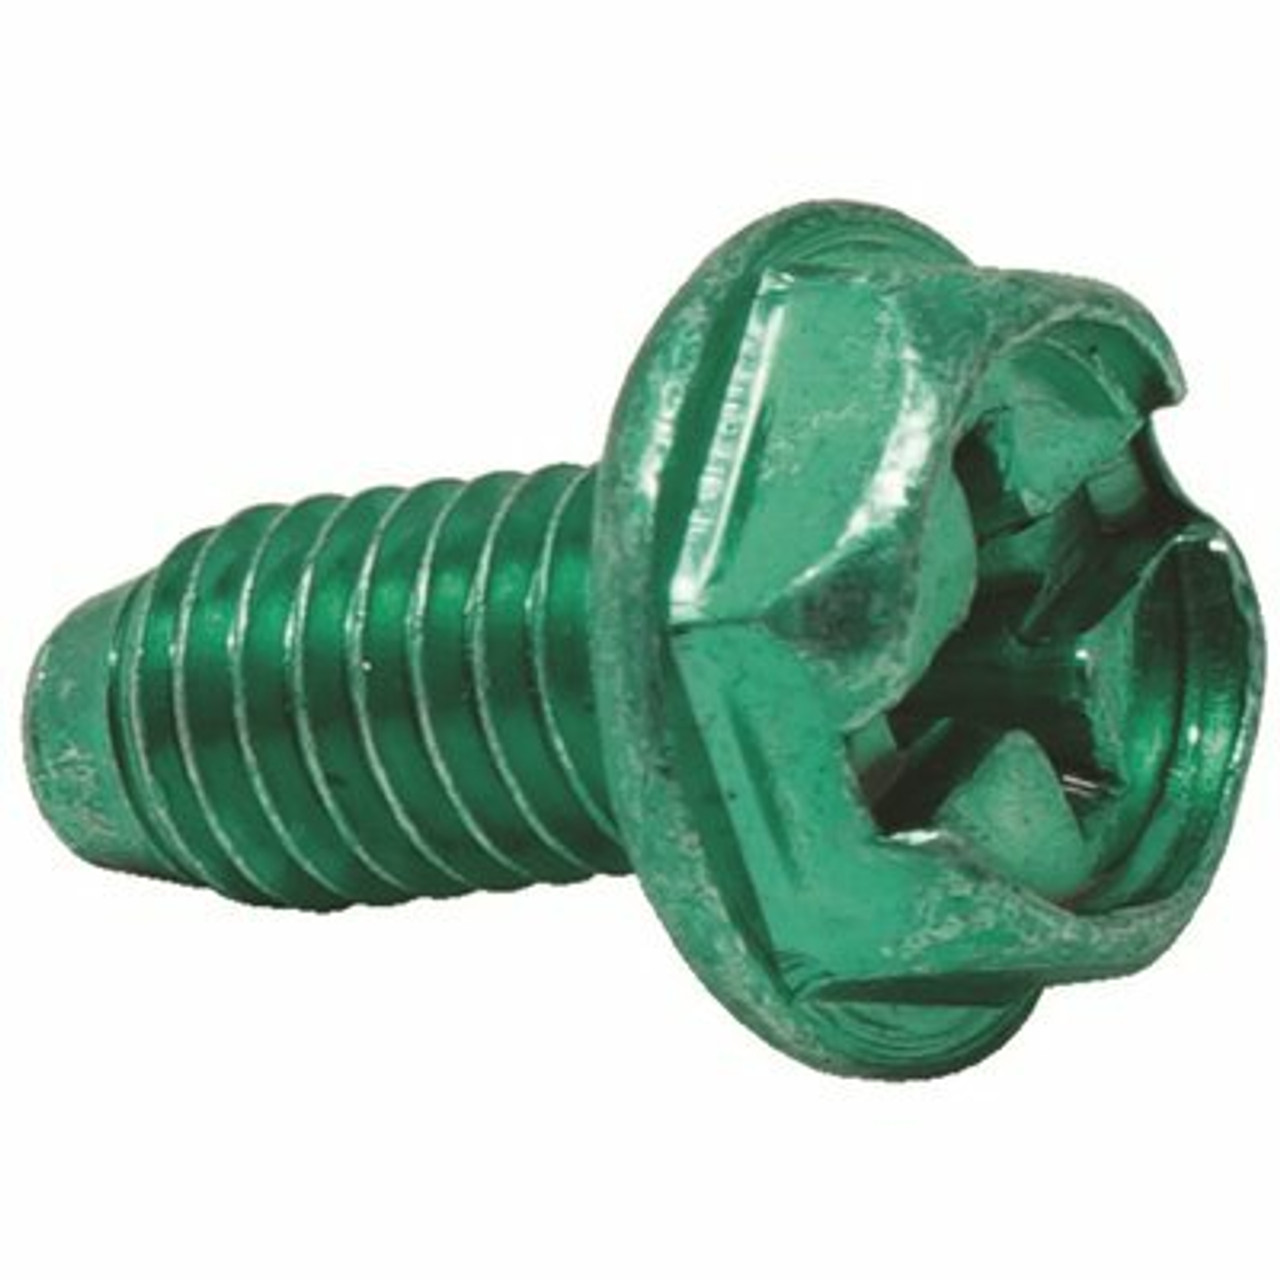 Southwire 10-32 Combination Grounding Screws (100-Pack)